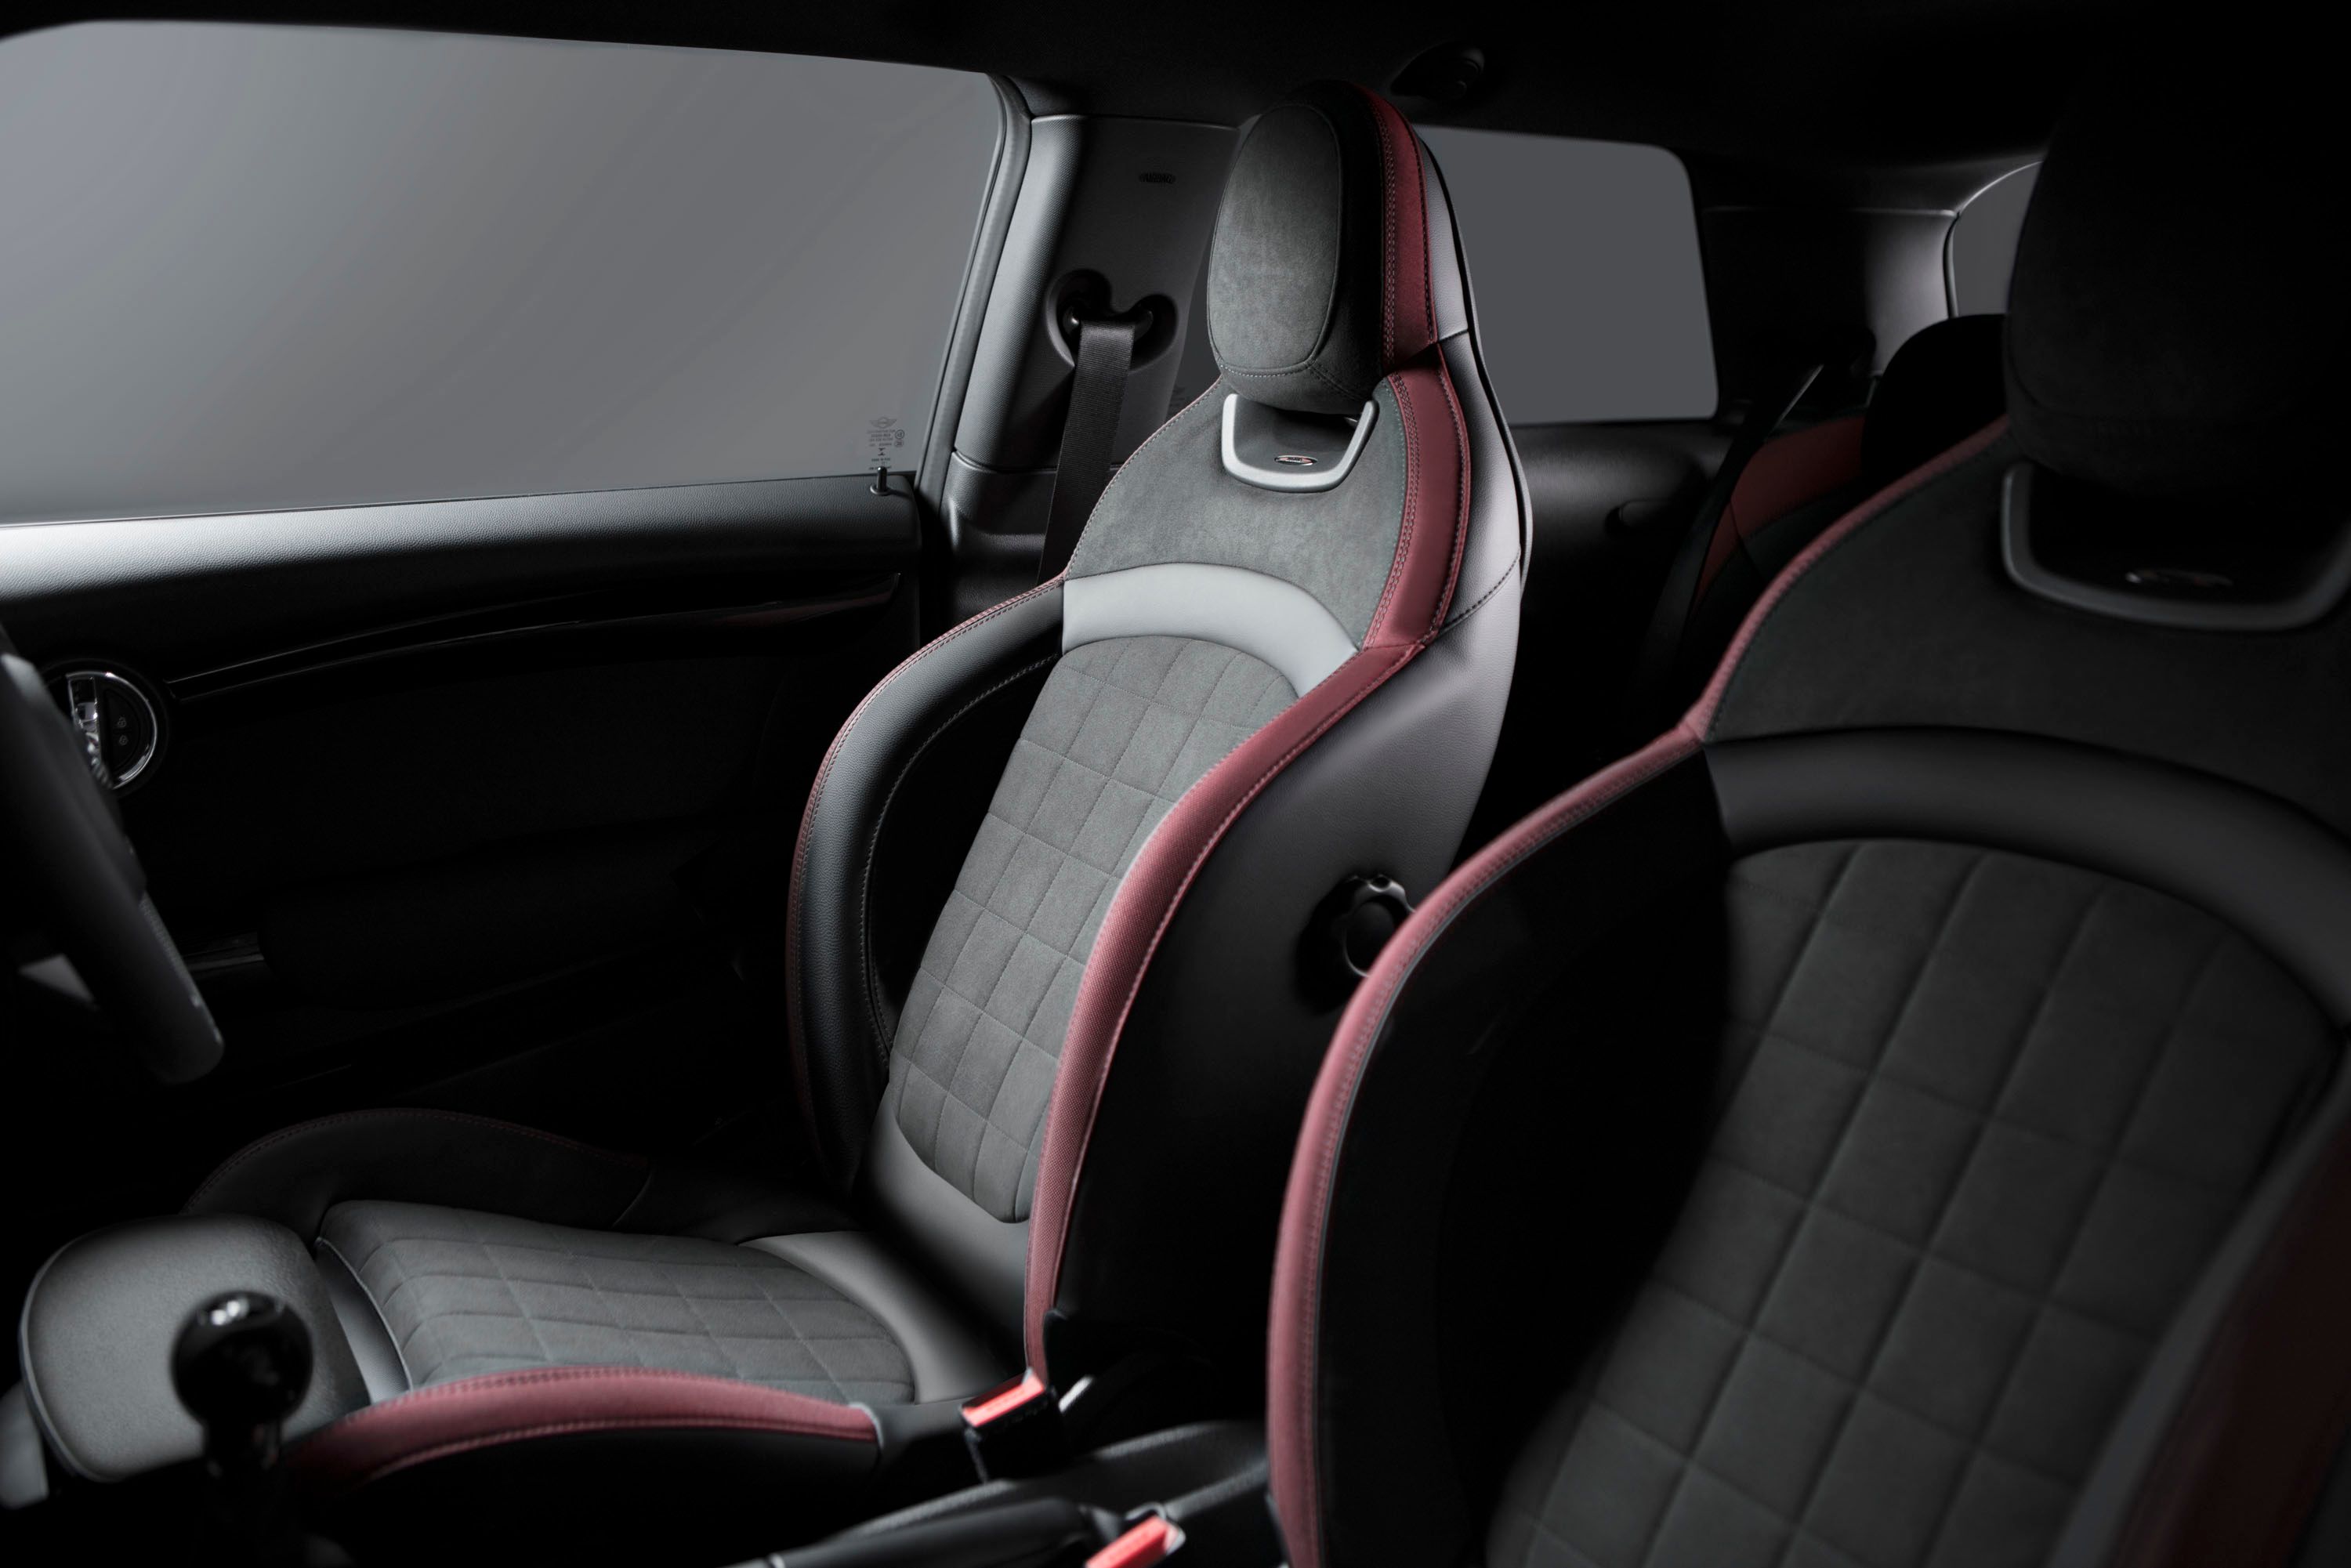 John Cooper Works Sports seats in Dinamica and leather 